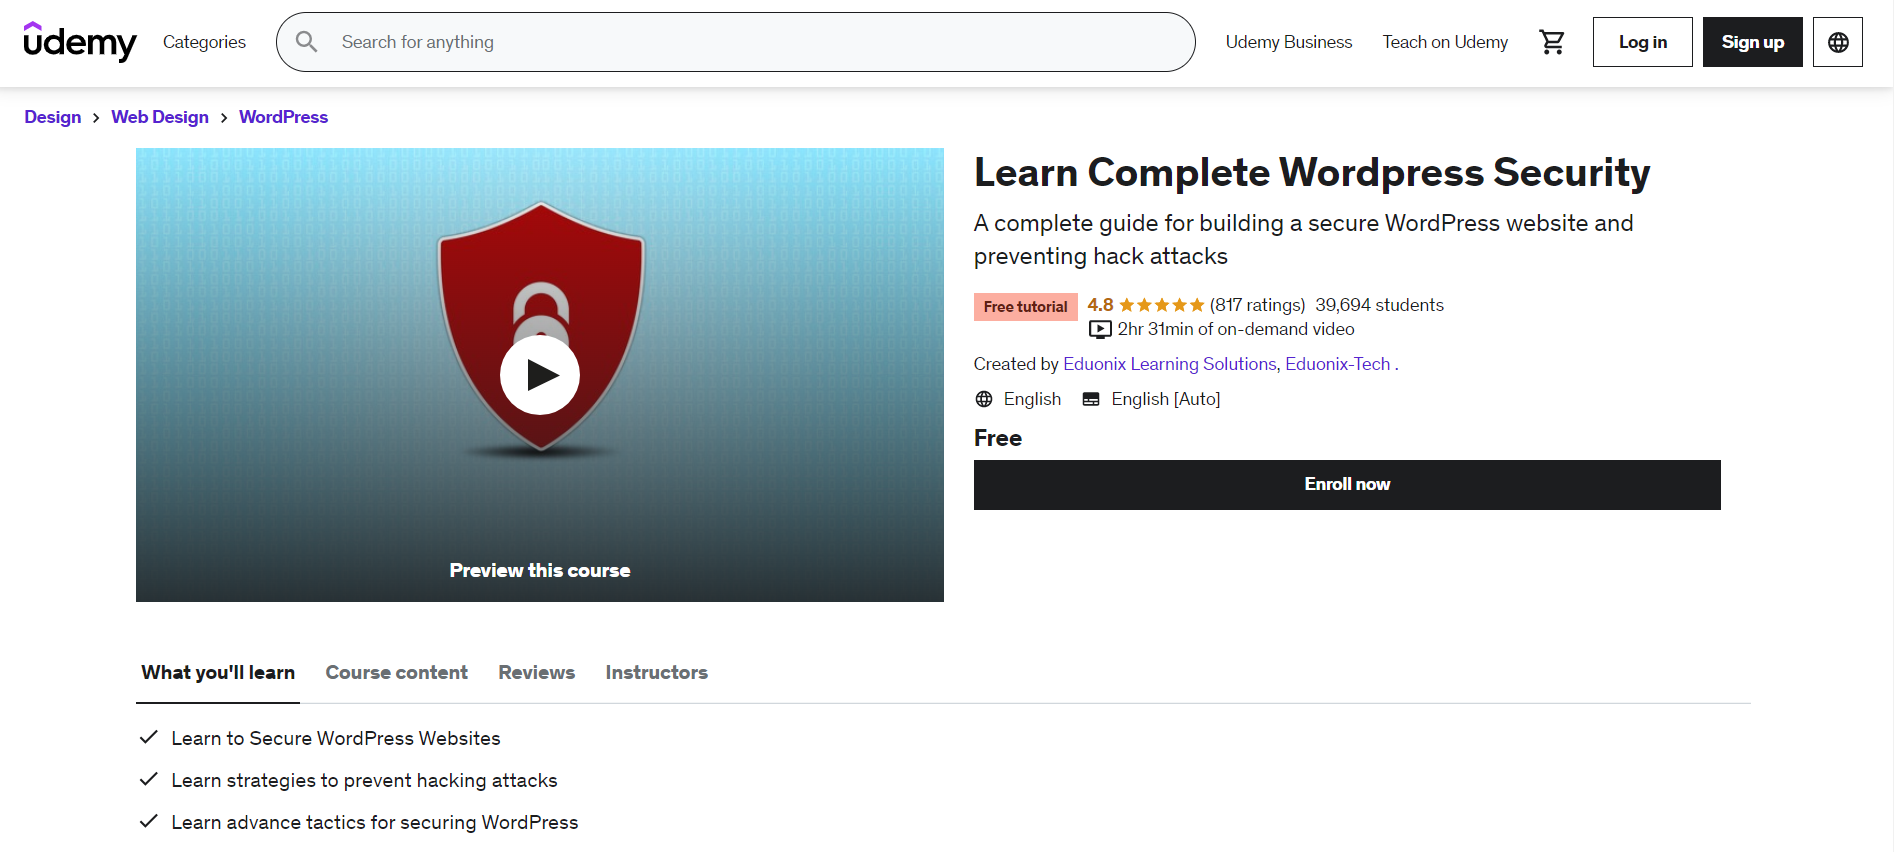 Learn Complete WordPress Security